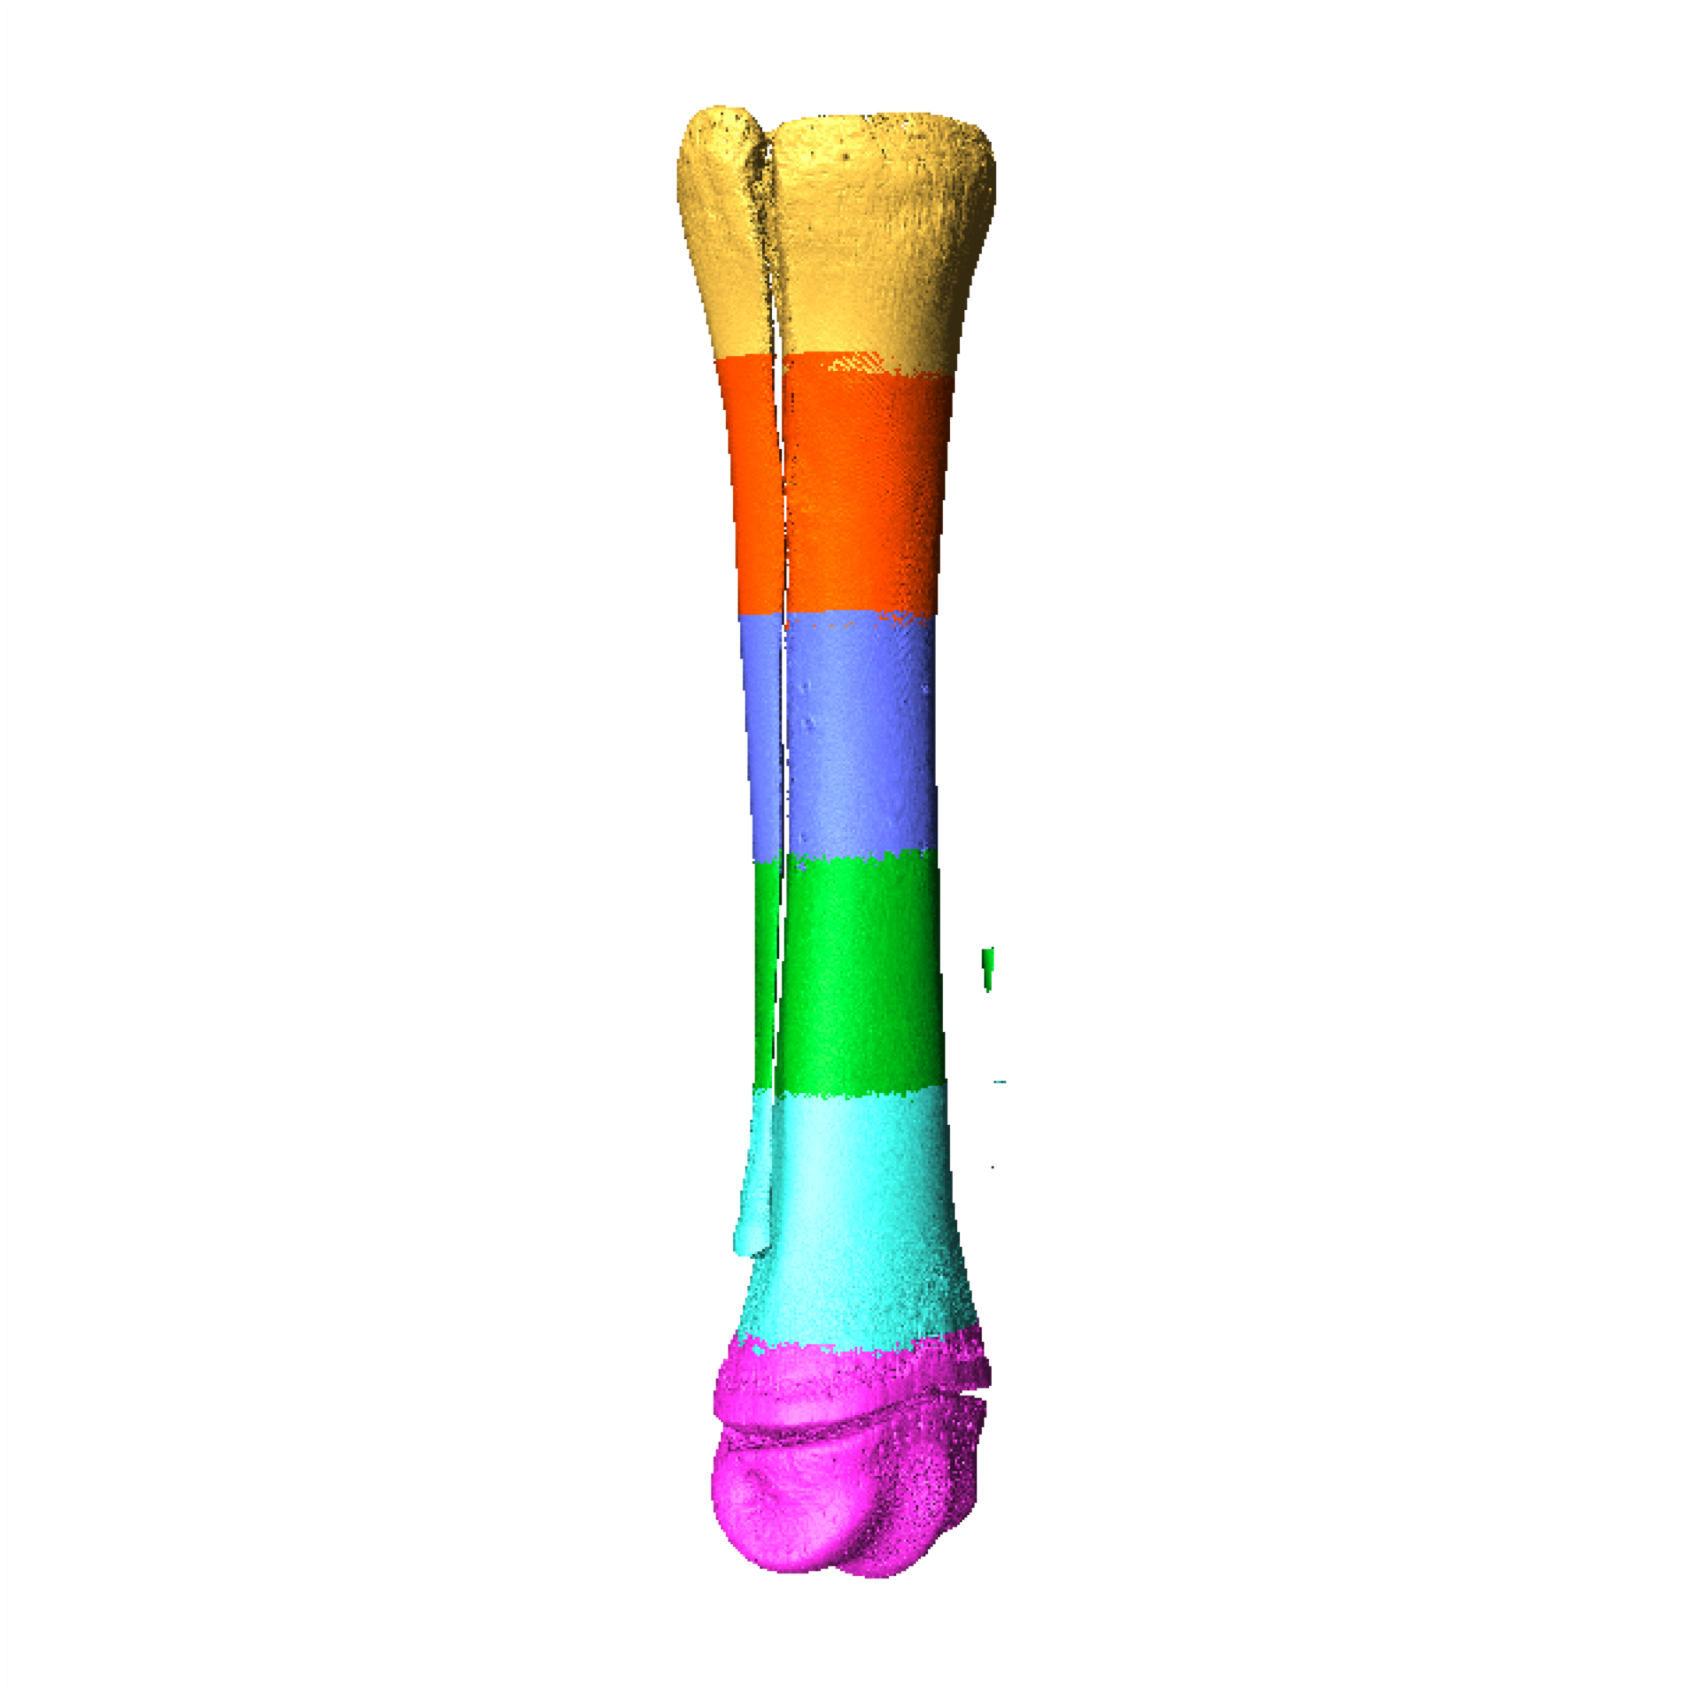 An image of a cannon bone in a young horse. From bottom to top, the bone is separated into pink, light blue, green, dark blue, orange, and yellow areas,